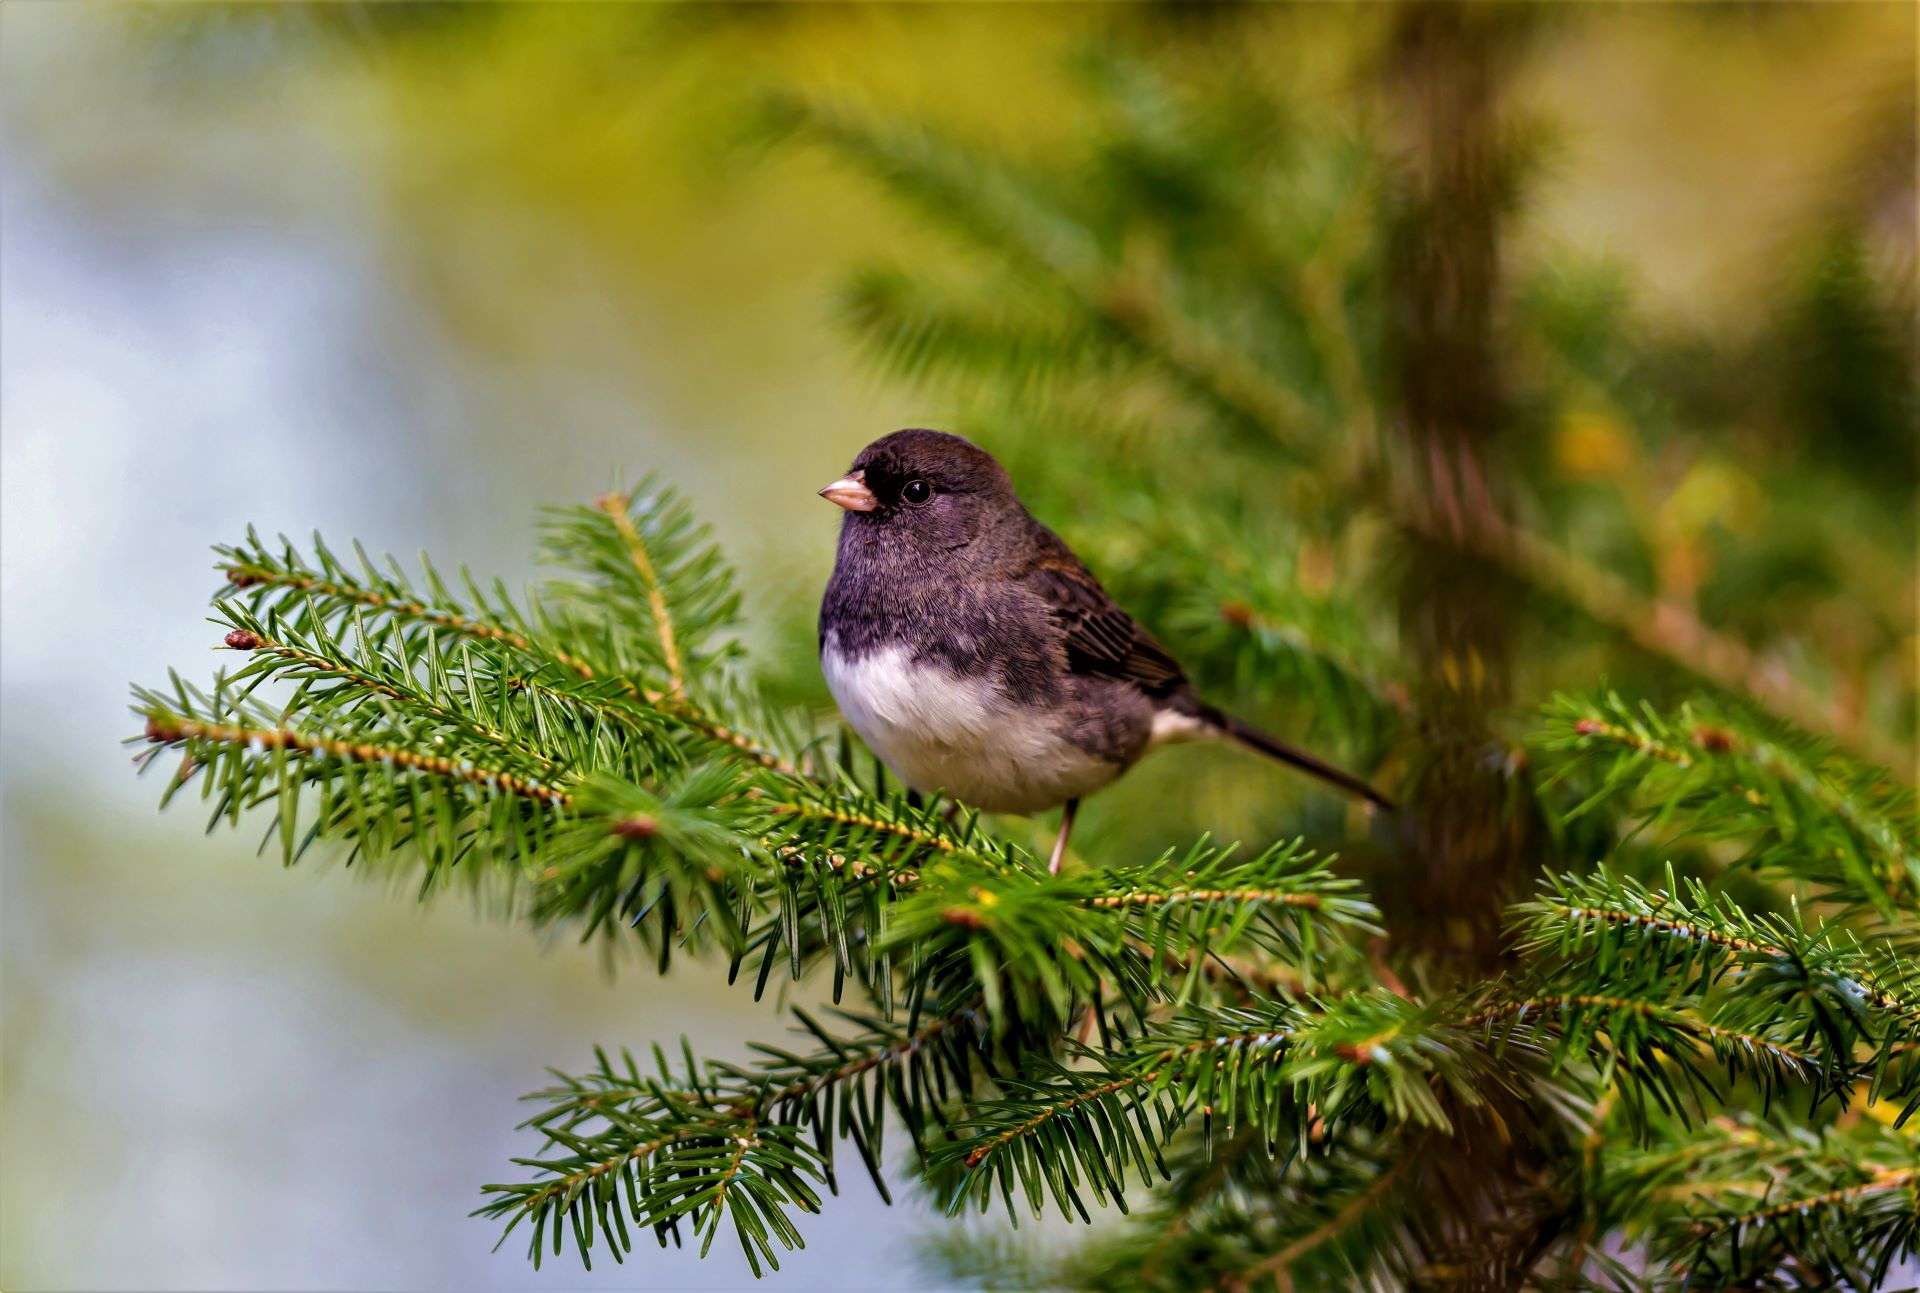 The dark-eyed junco is a species of the juncos, a genus of small grayish American sparrows. This bird is common across much of temperate North America and in summer ranges far into the Arctic.